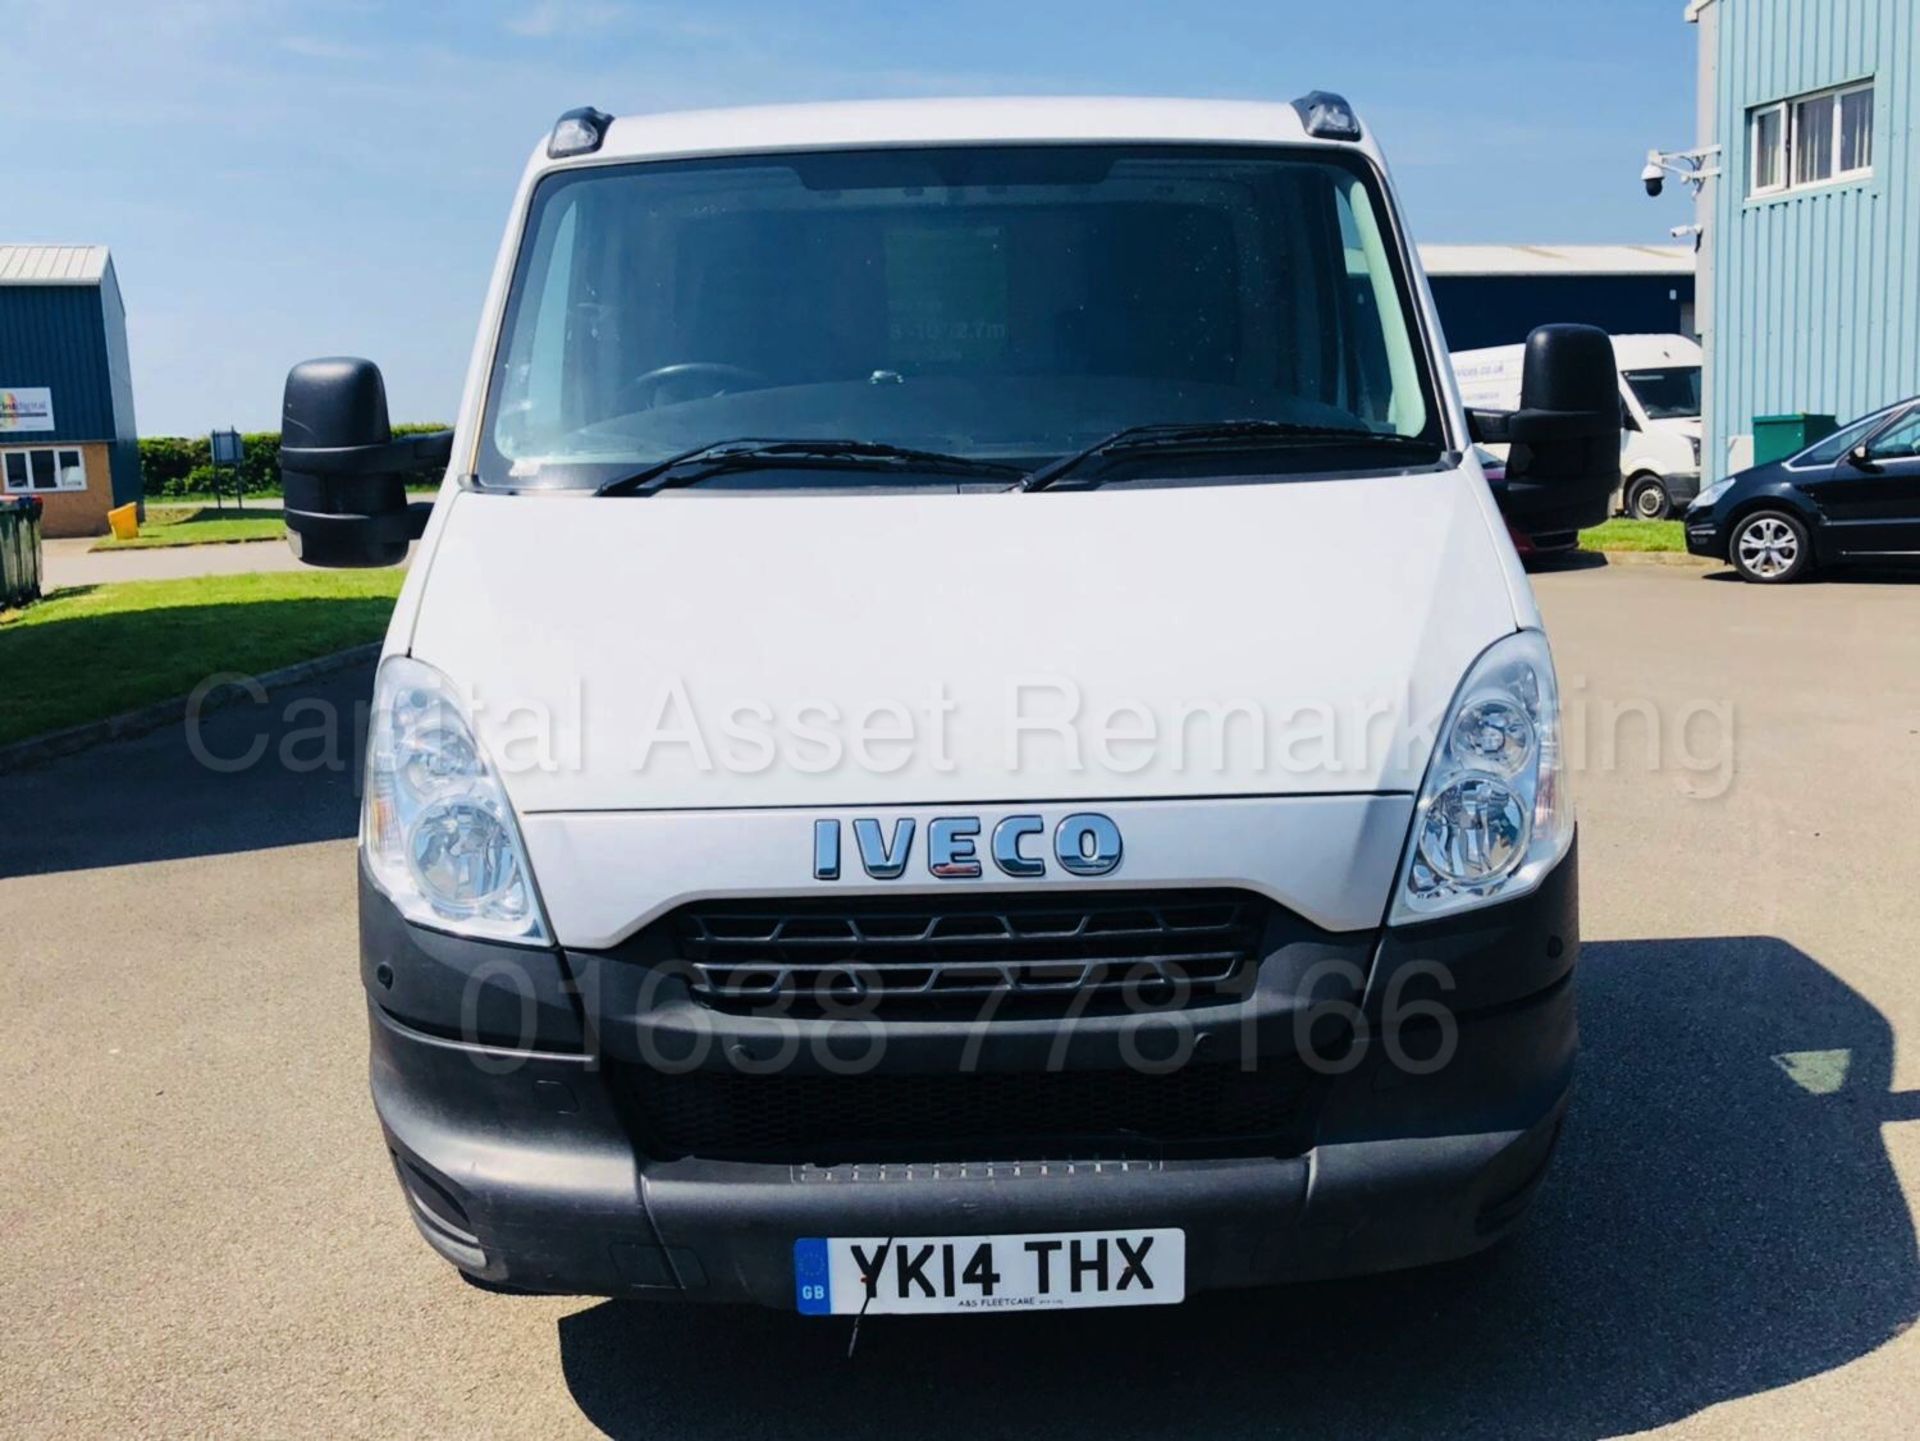 IVECO DAILY 35S11 'LWB - CHASSIS CAB' (2014 - 14 REG) '2.3 DIESEL - 6 SPEED' (1 OWNER) - Image 10 of 18